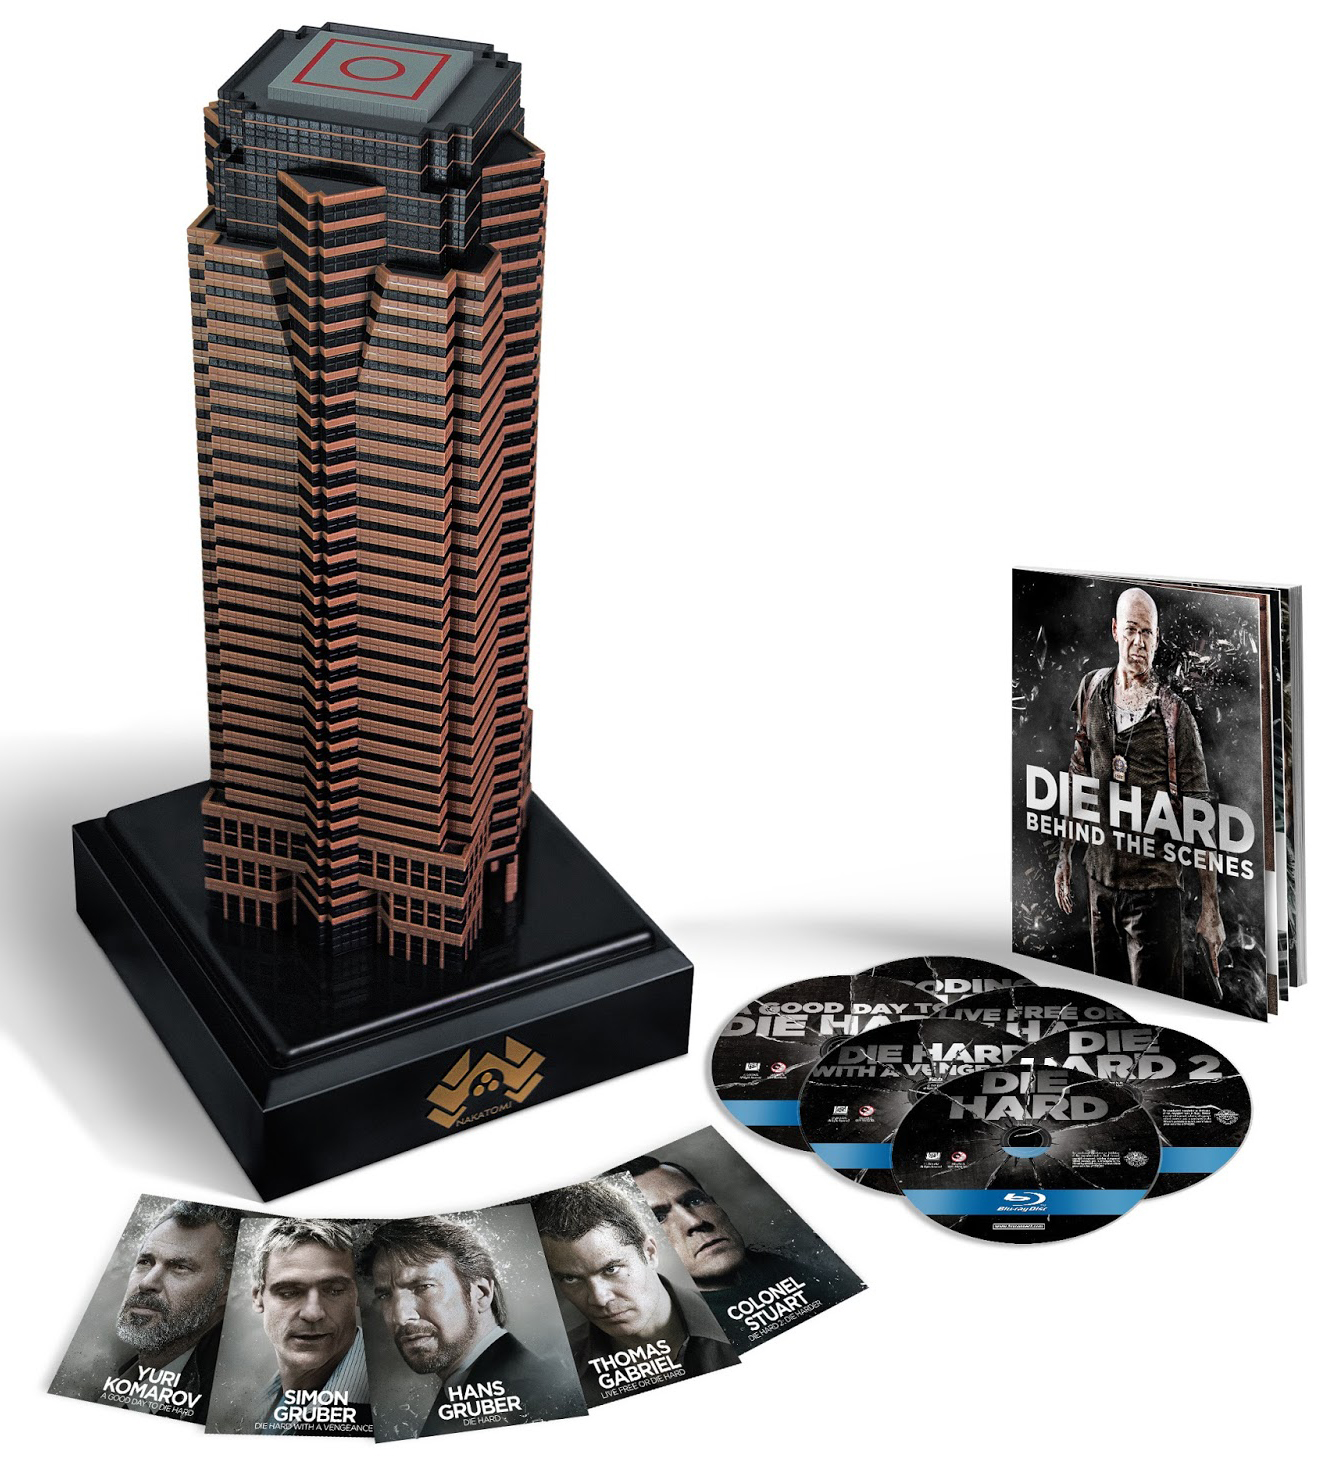 8 Impractical But Totally Pretty Blu-ray Box Sets and Packaging